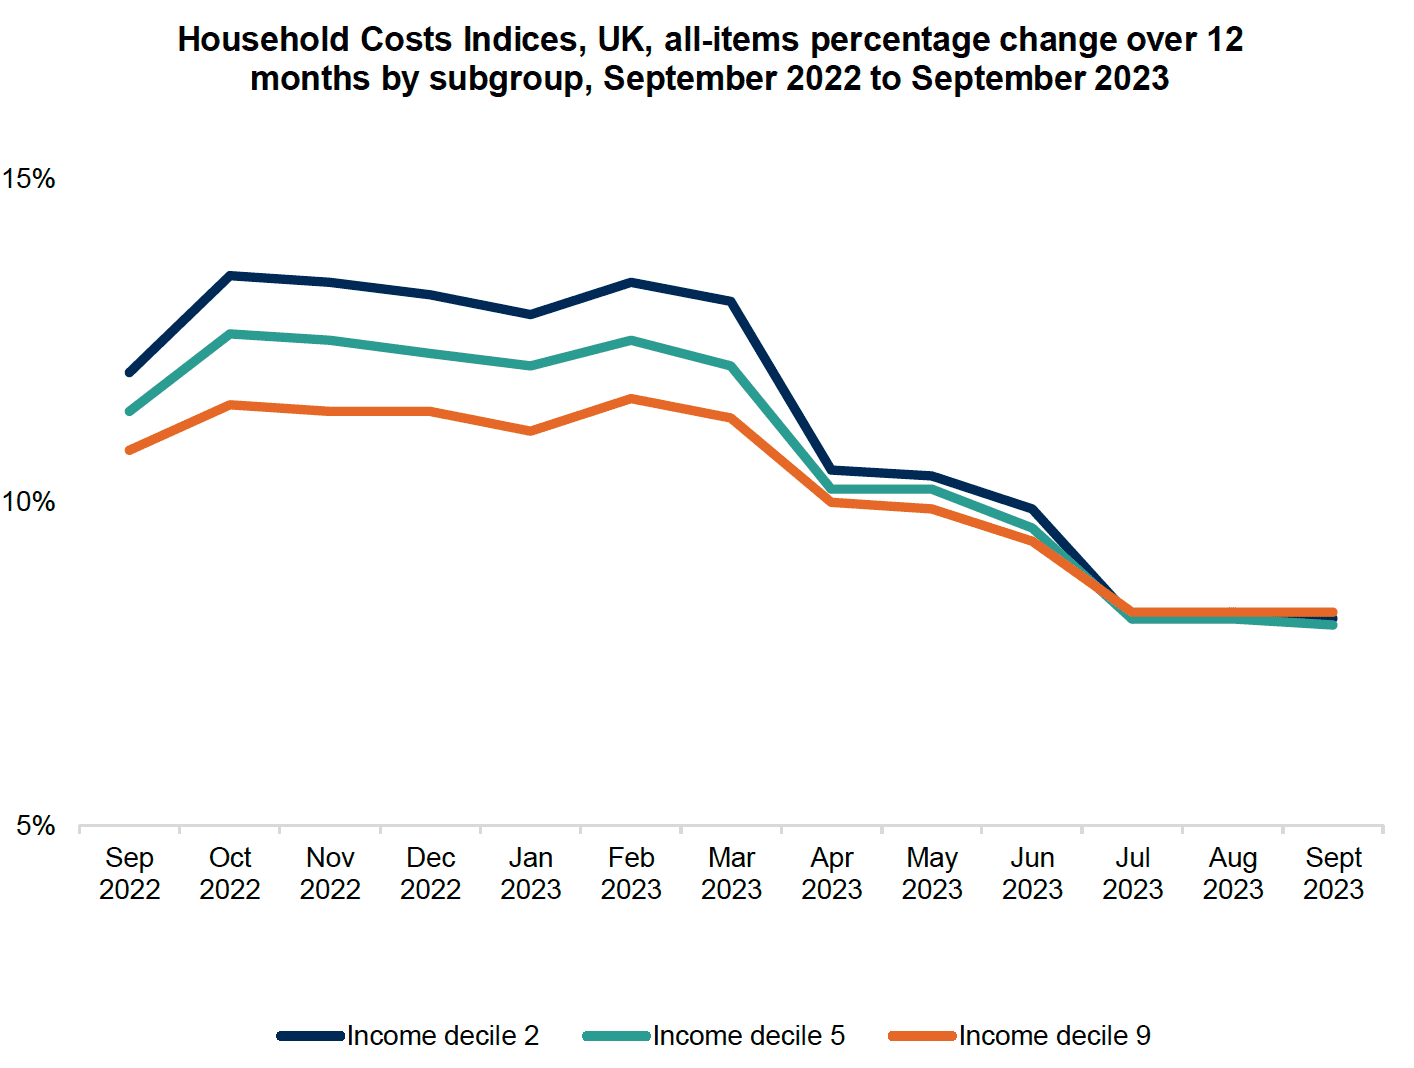 A line chart showing household cost indices between September 2022 and September 2023 for income deciles 2,5 and 9.